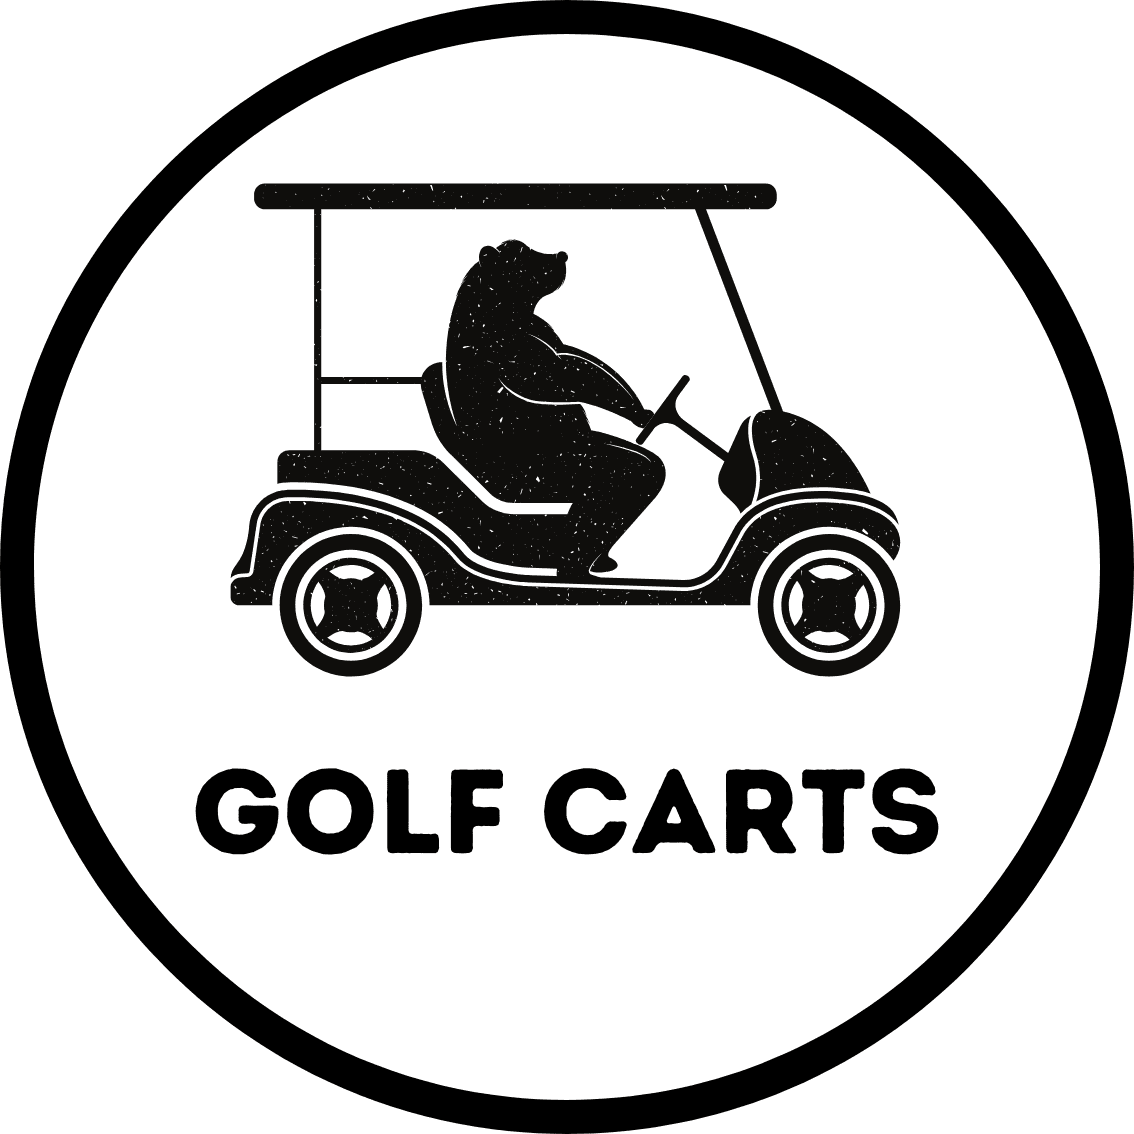 Great for Golf Carts